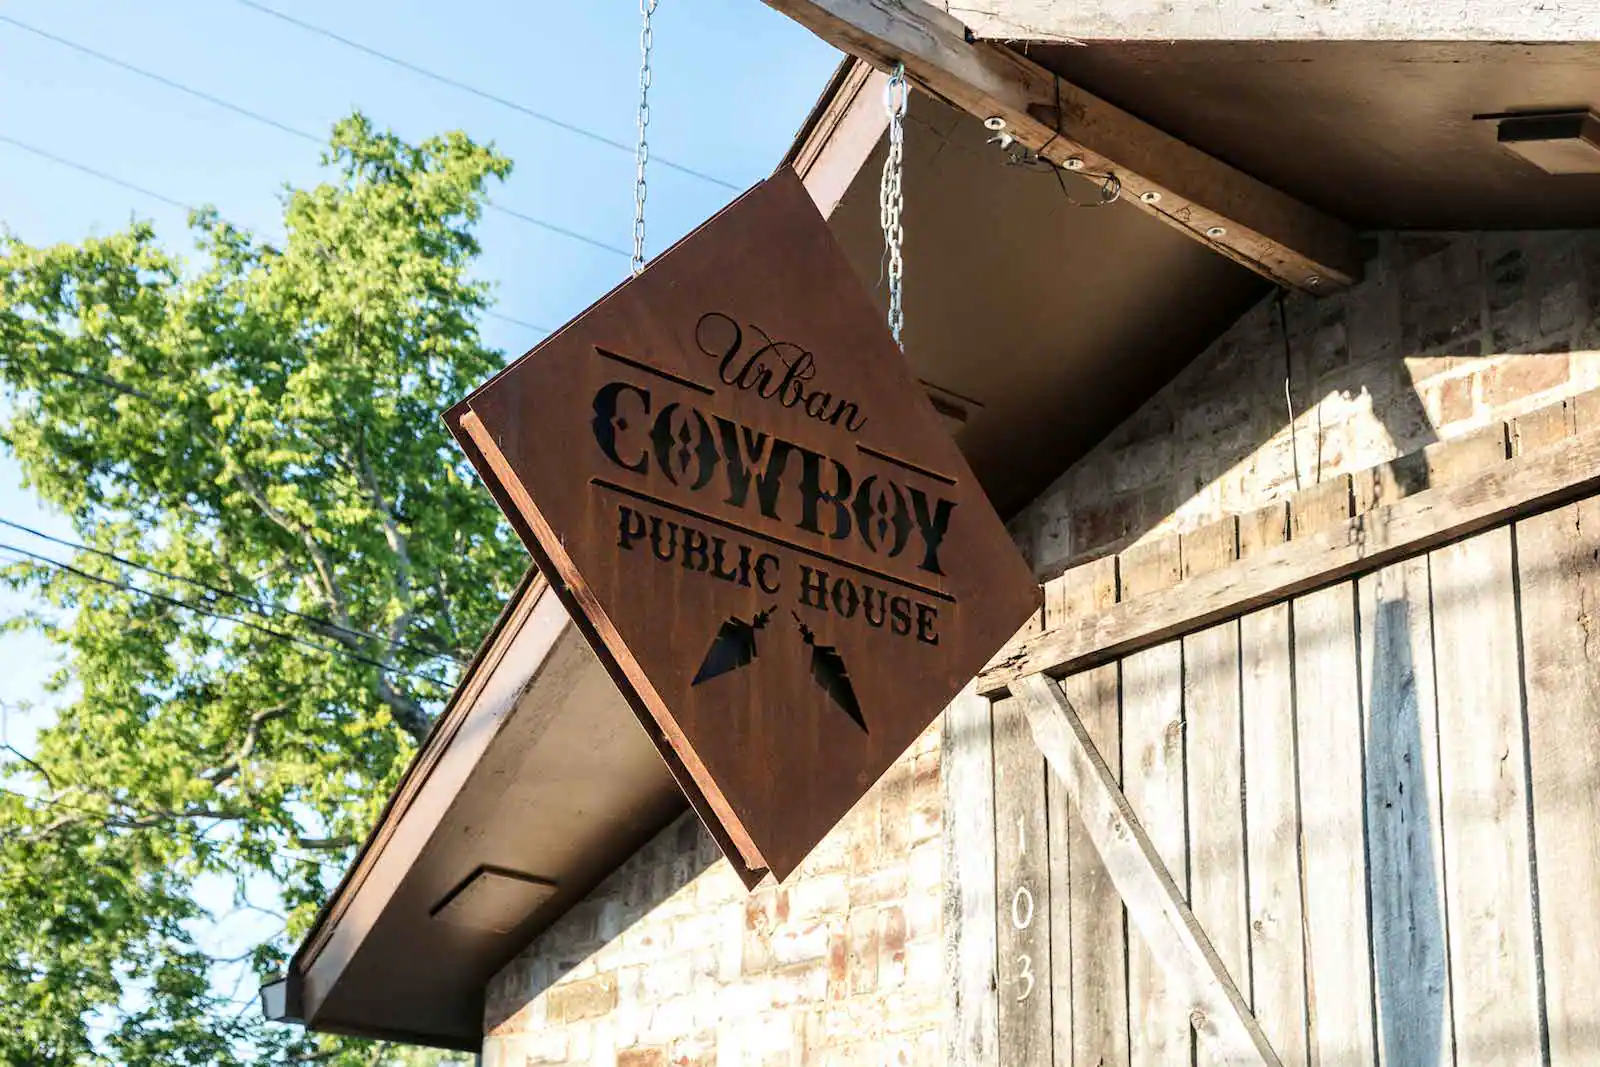 A diamond sign hanging outside the Public House of Urban Cowboy Nashville.